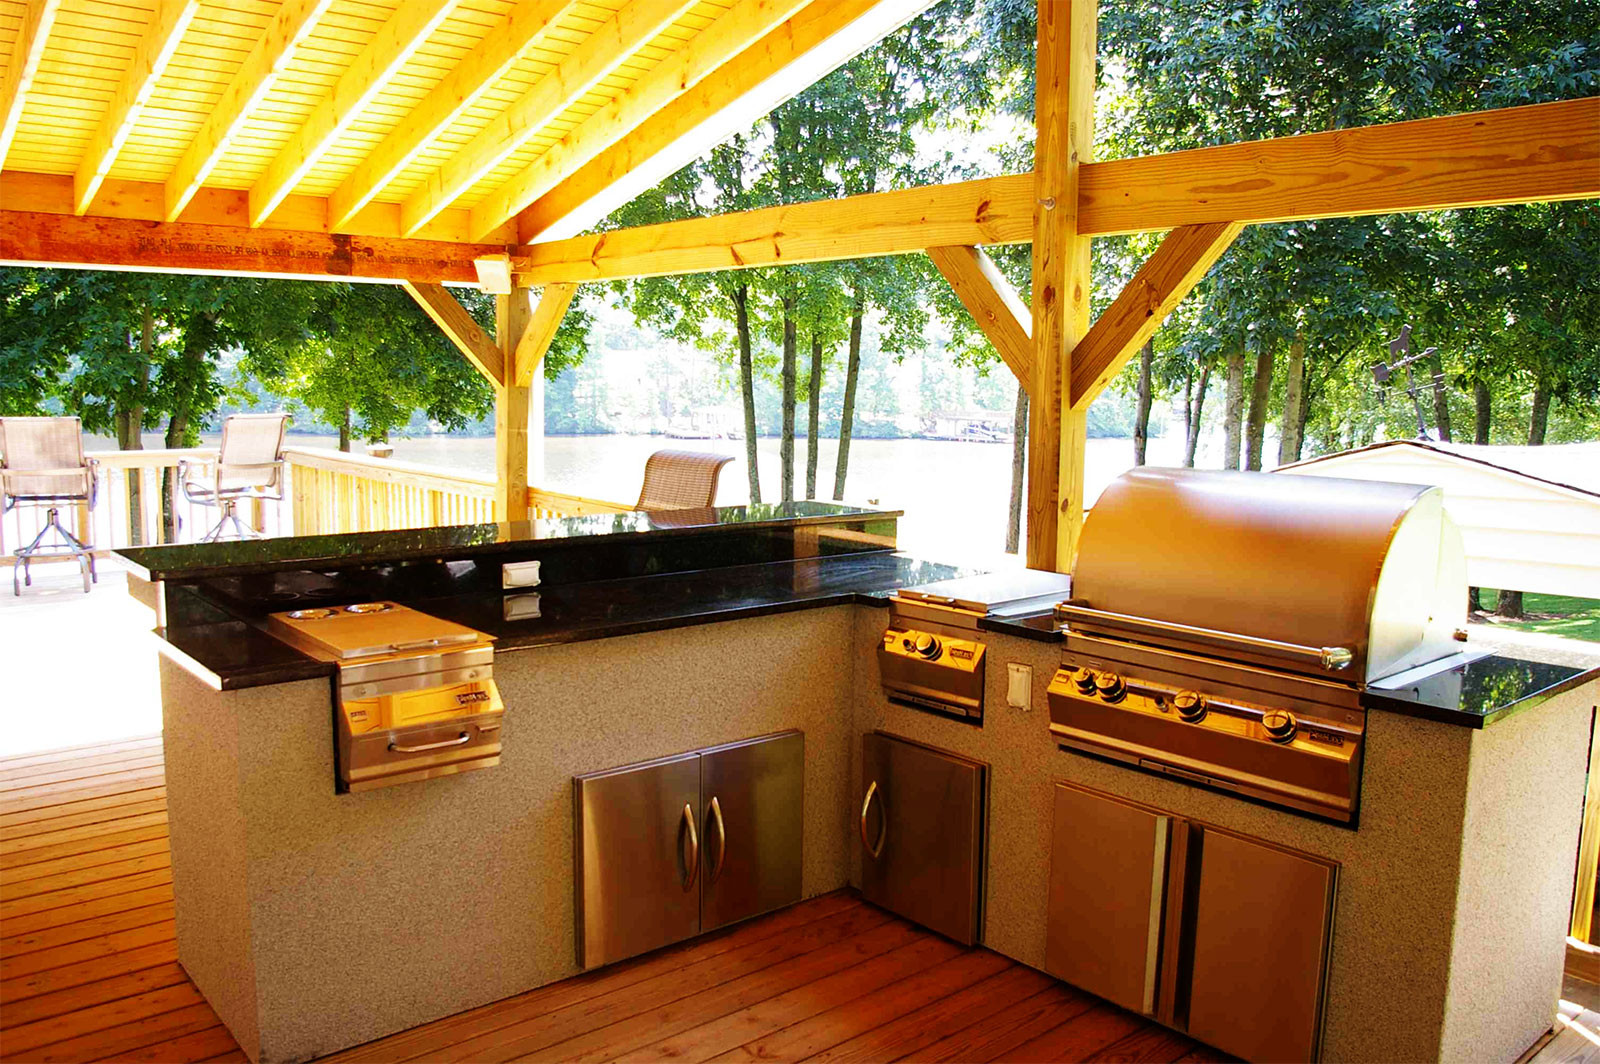 Affordable Outdoor Kitchens
 cheap outdoor kitchen design ideas Furniture Ideas